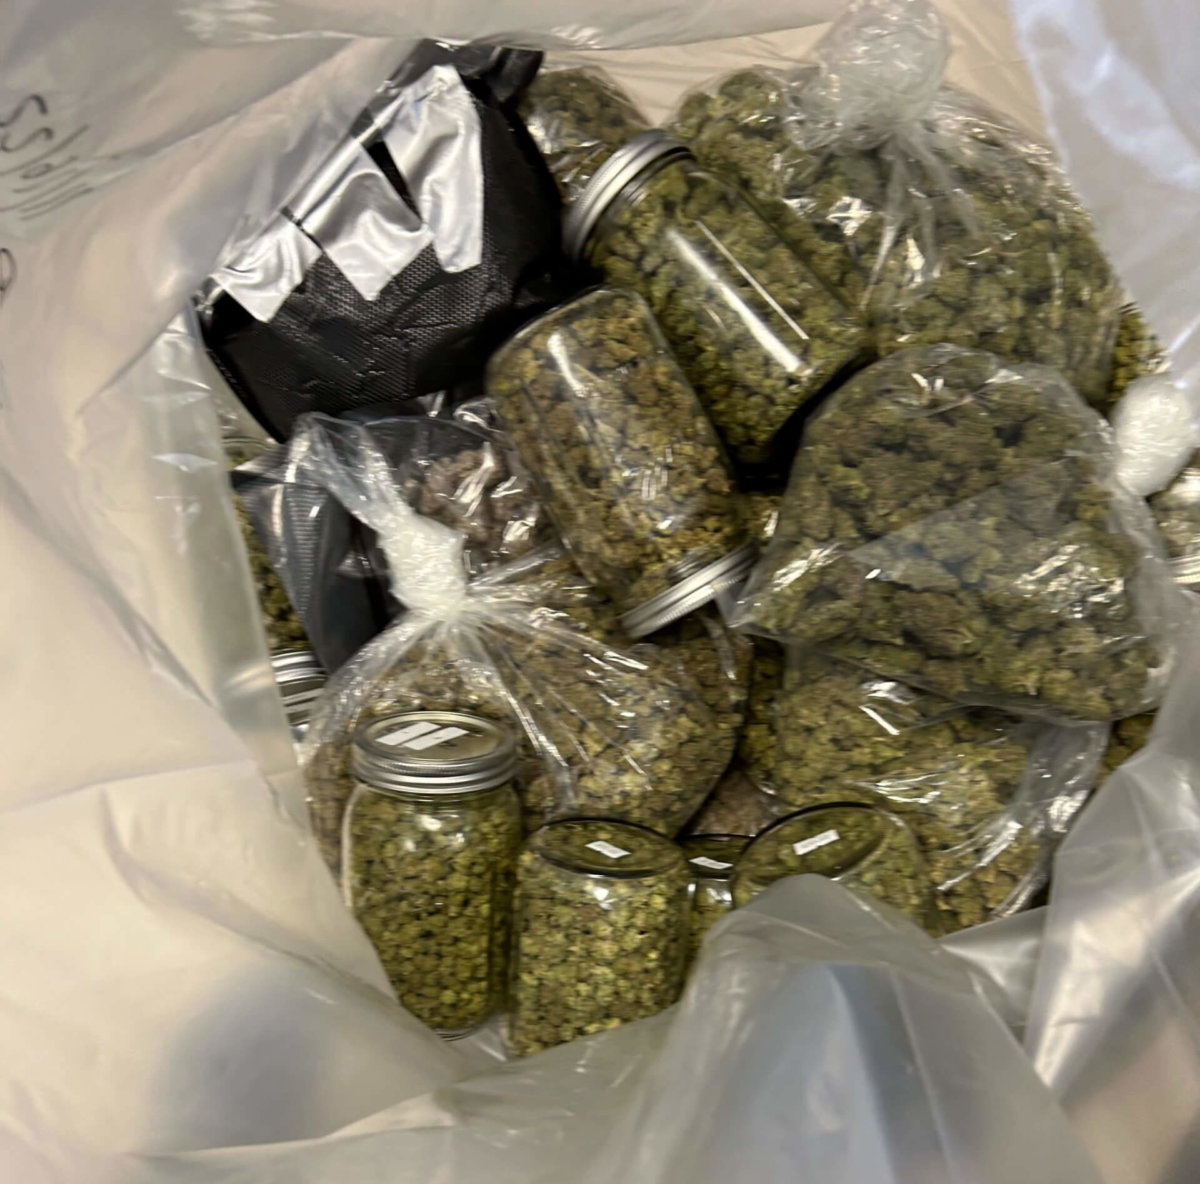 Roughly $1 million dollars worth of cannabis were gathered from Big Chief.